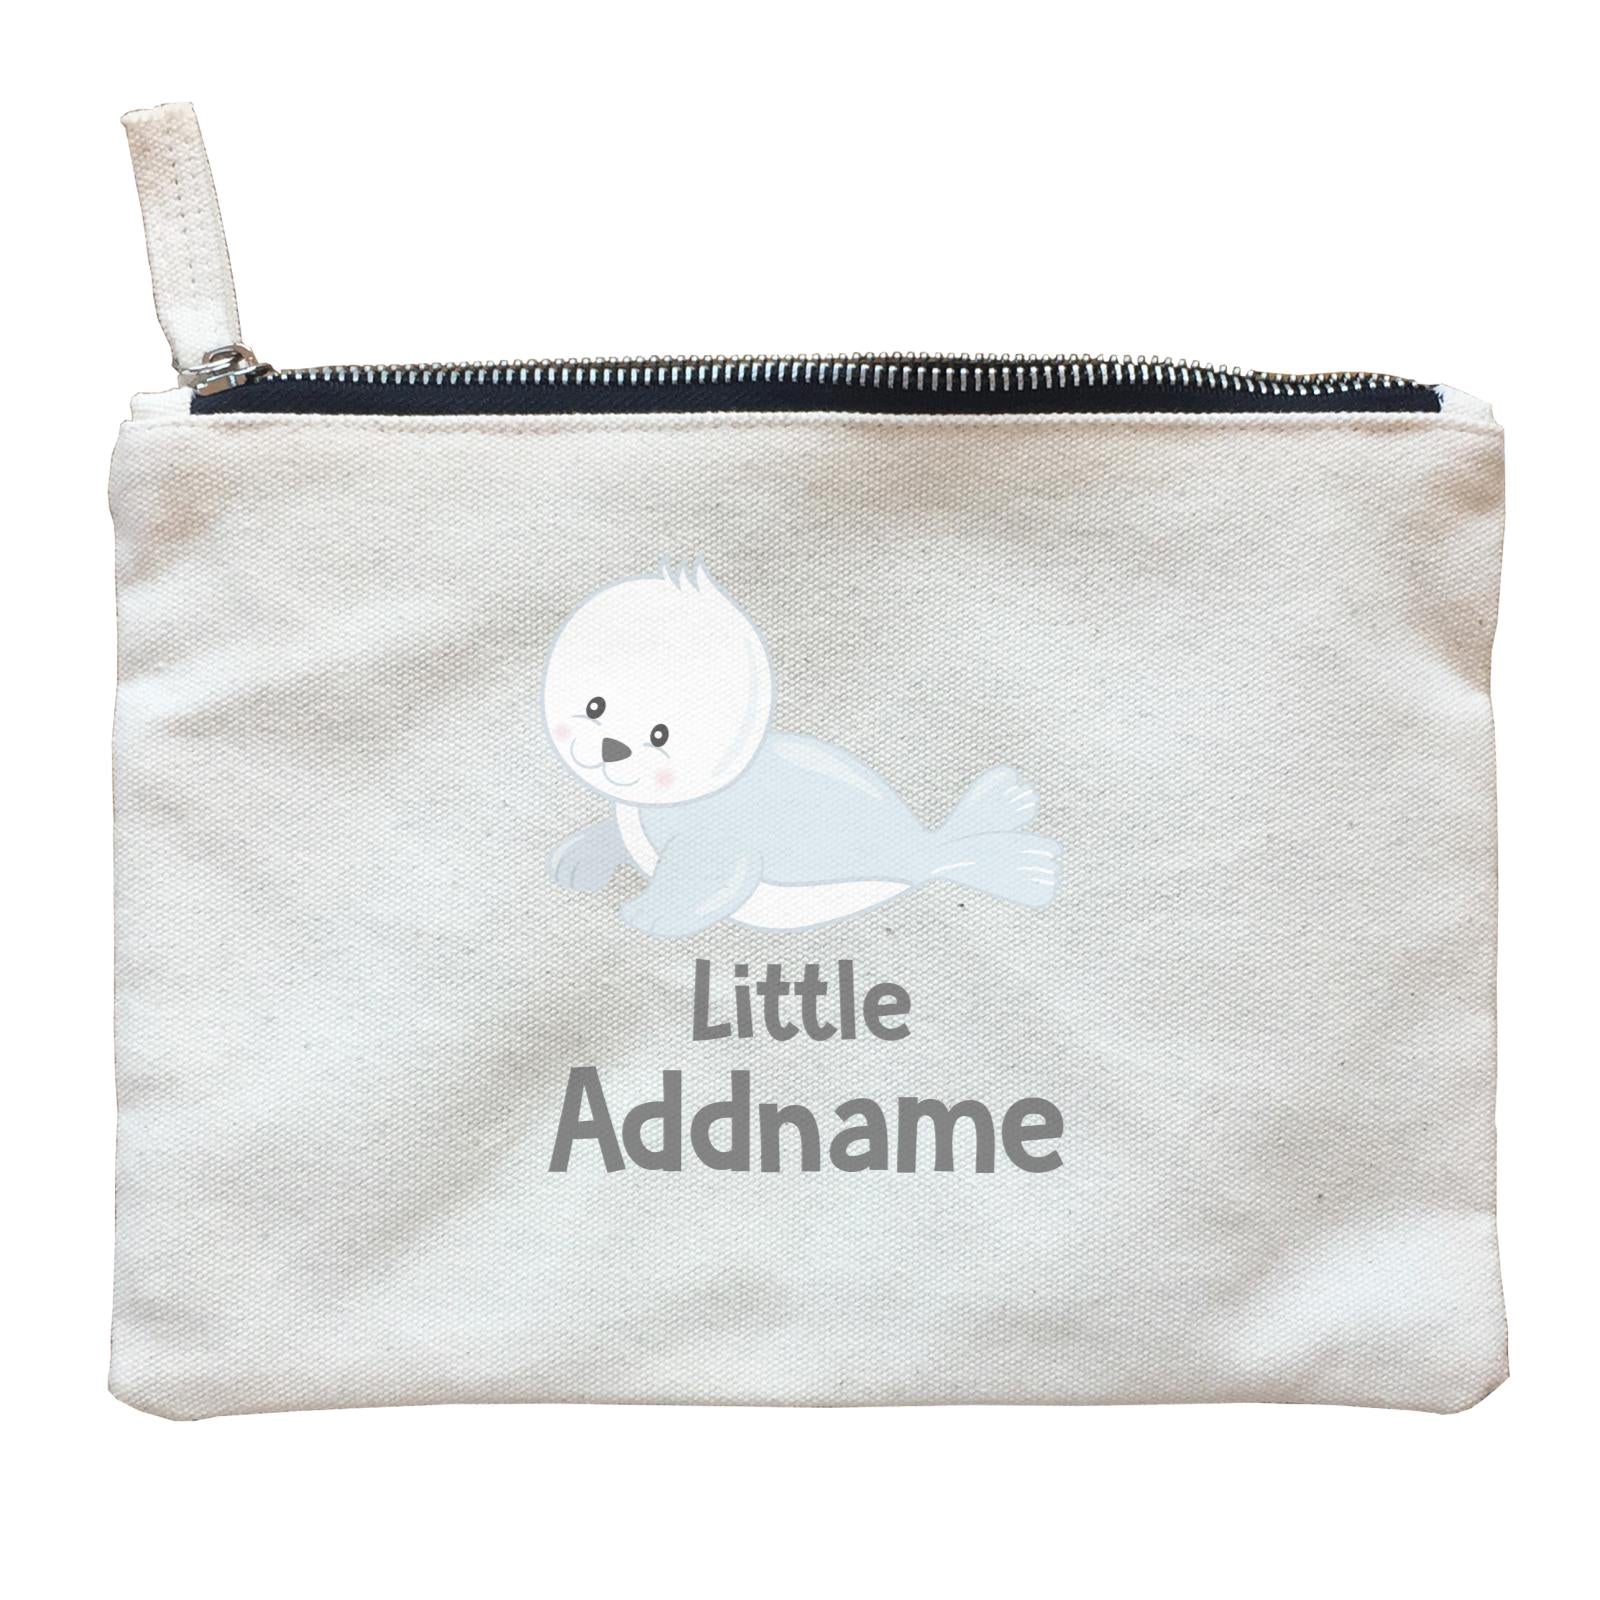 Arctic Animals Little White Seal Addname Zipper Pouch